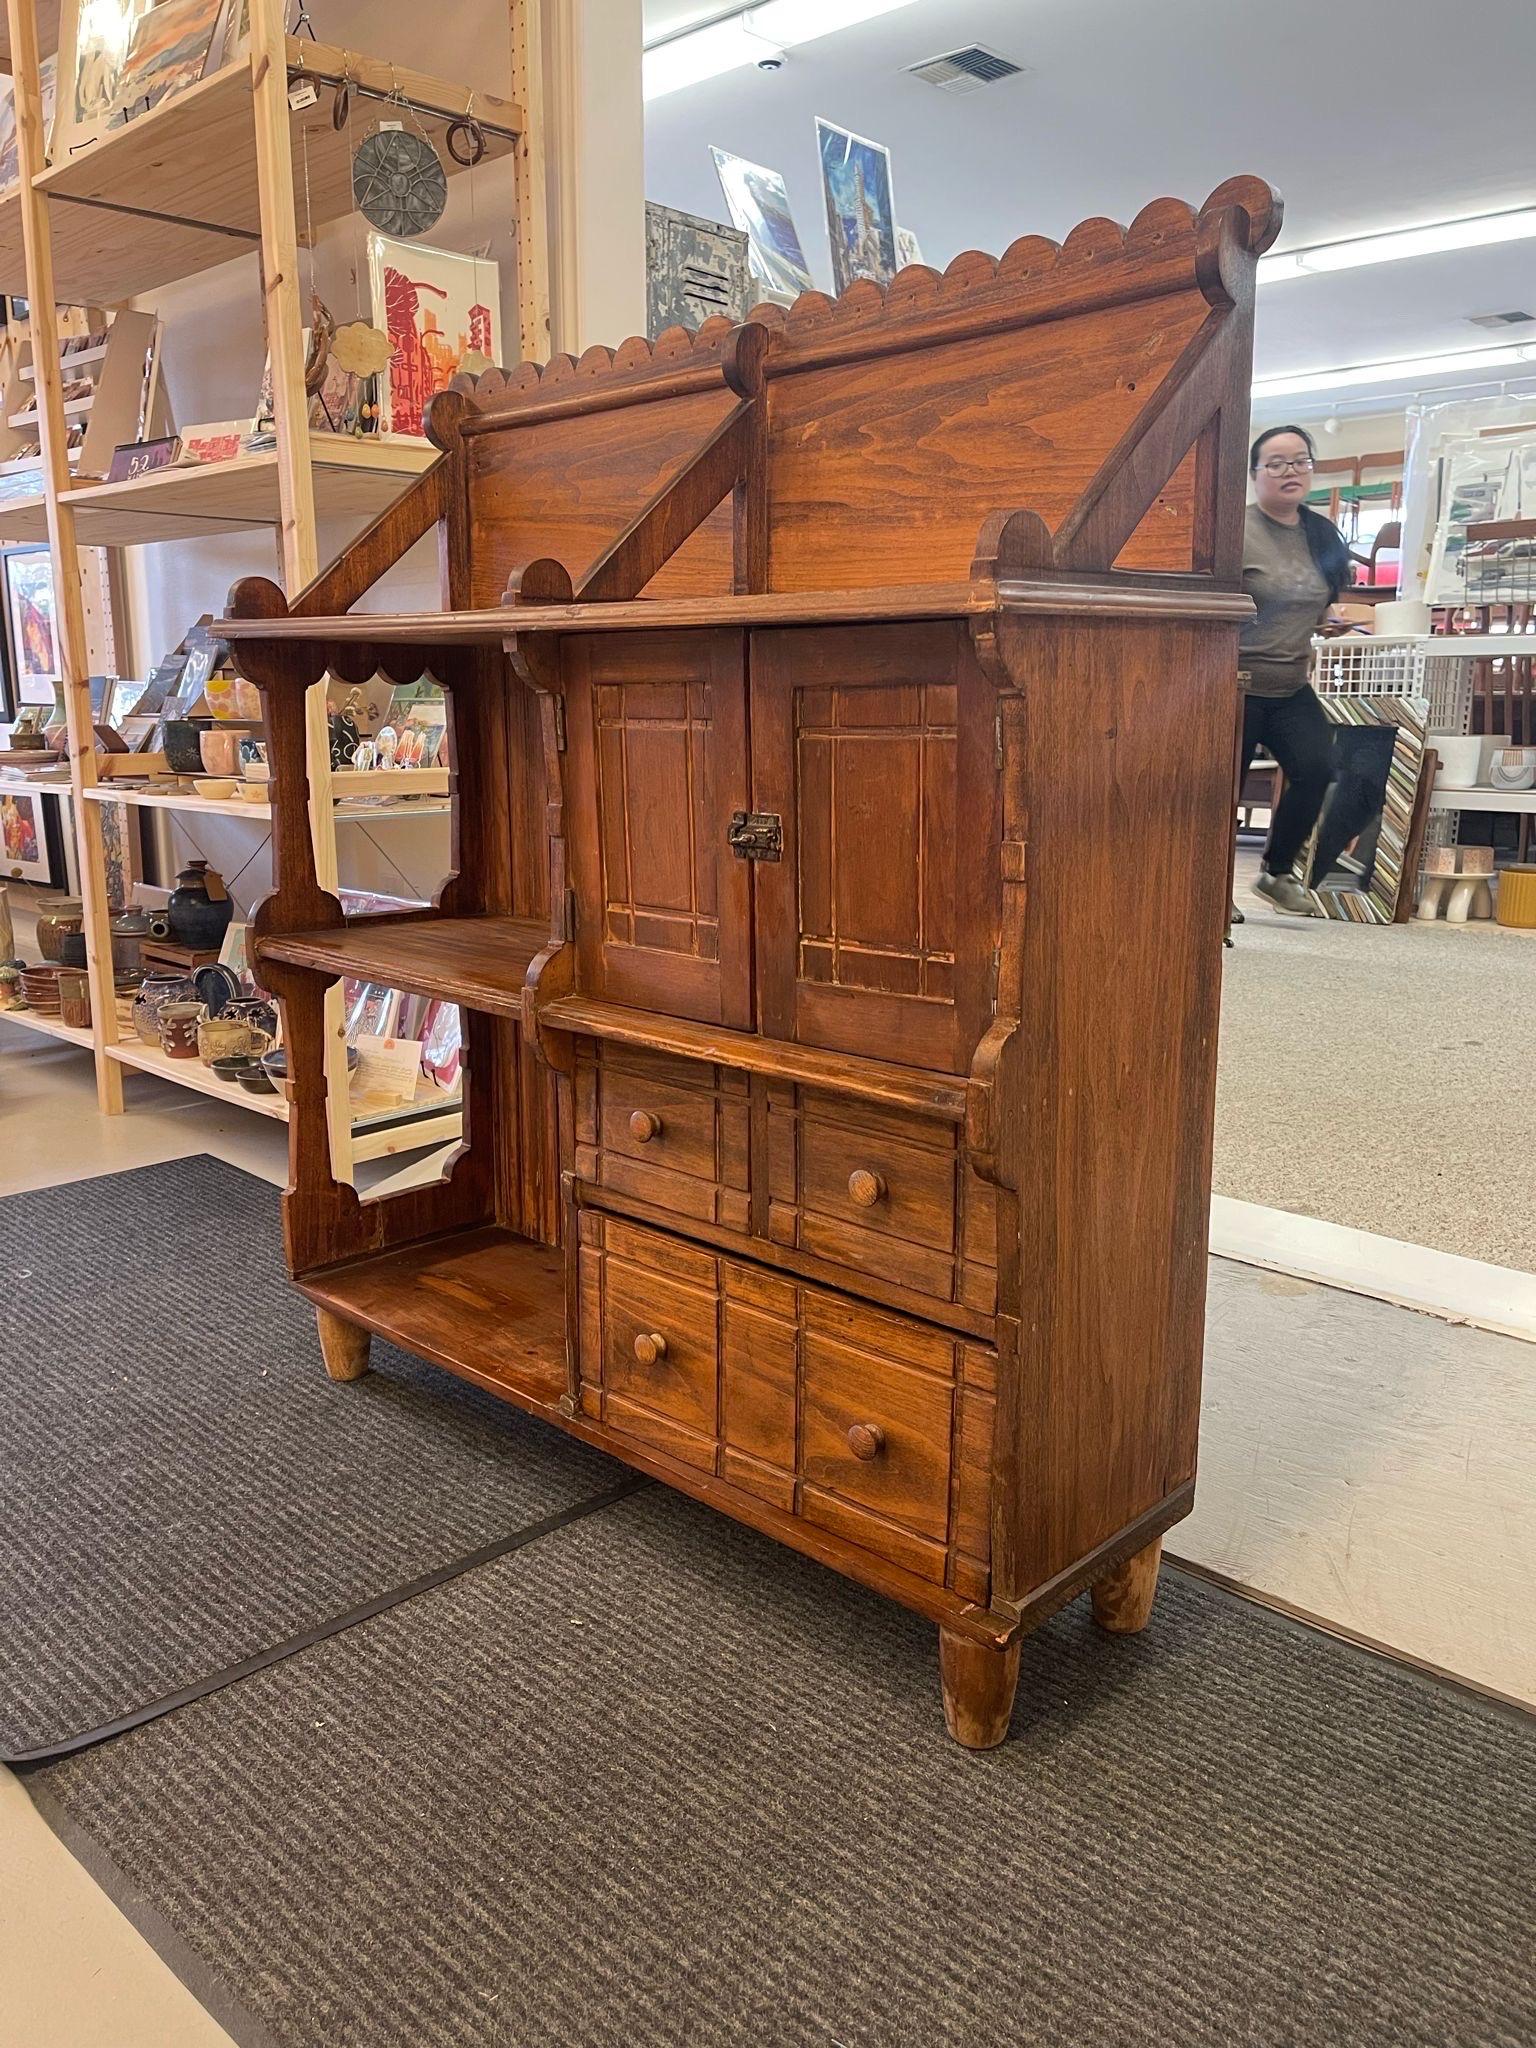 Vintage Primitive Arts and Craft Style Carved Wood Bookshelf and Storage Cabinet In Good Condition For Sale In Seattle, WA